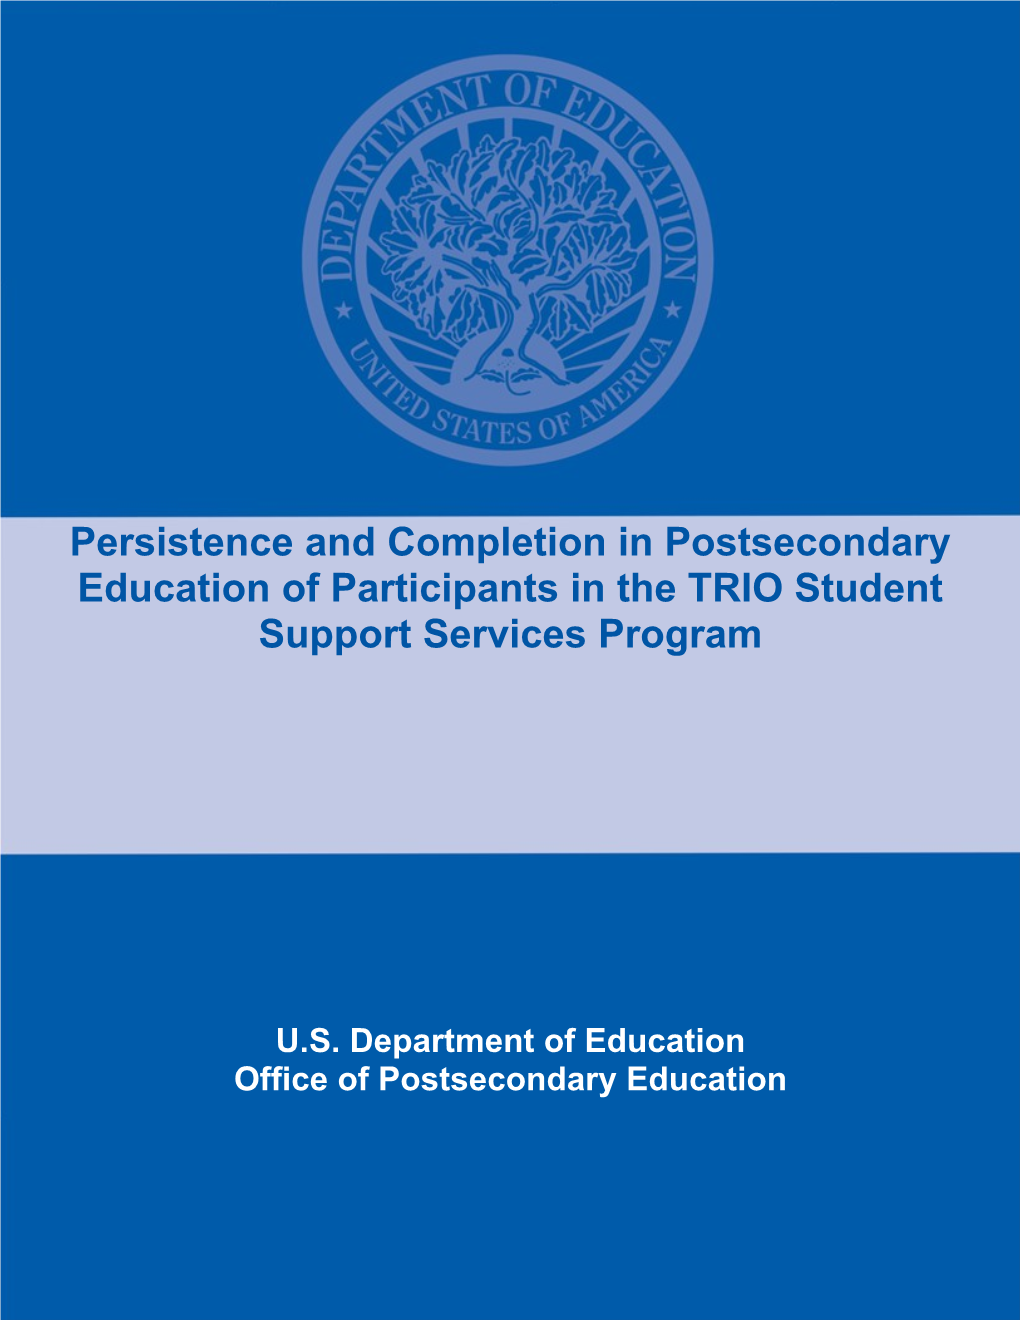 Persistence and Completion in Postsecondary Education of Participants in the Student Support